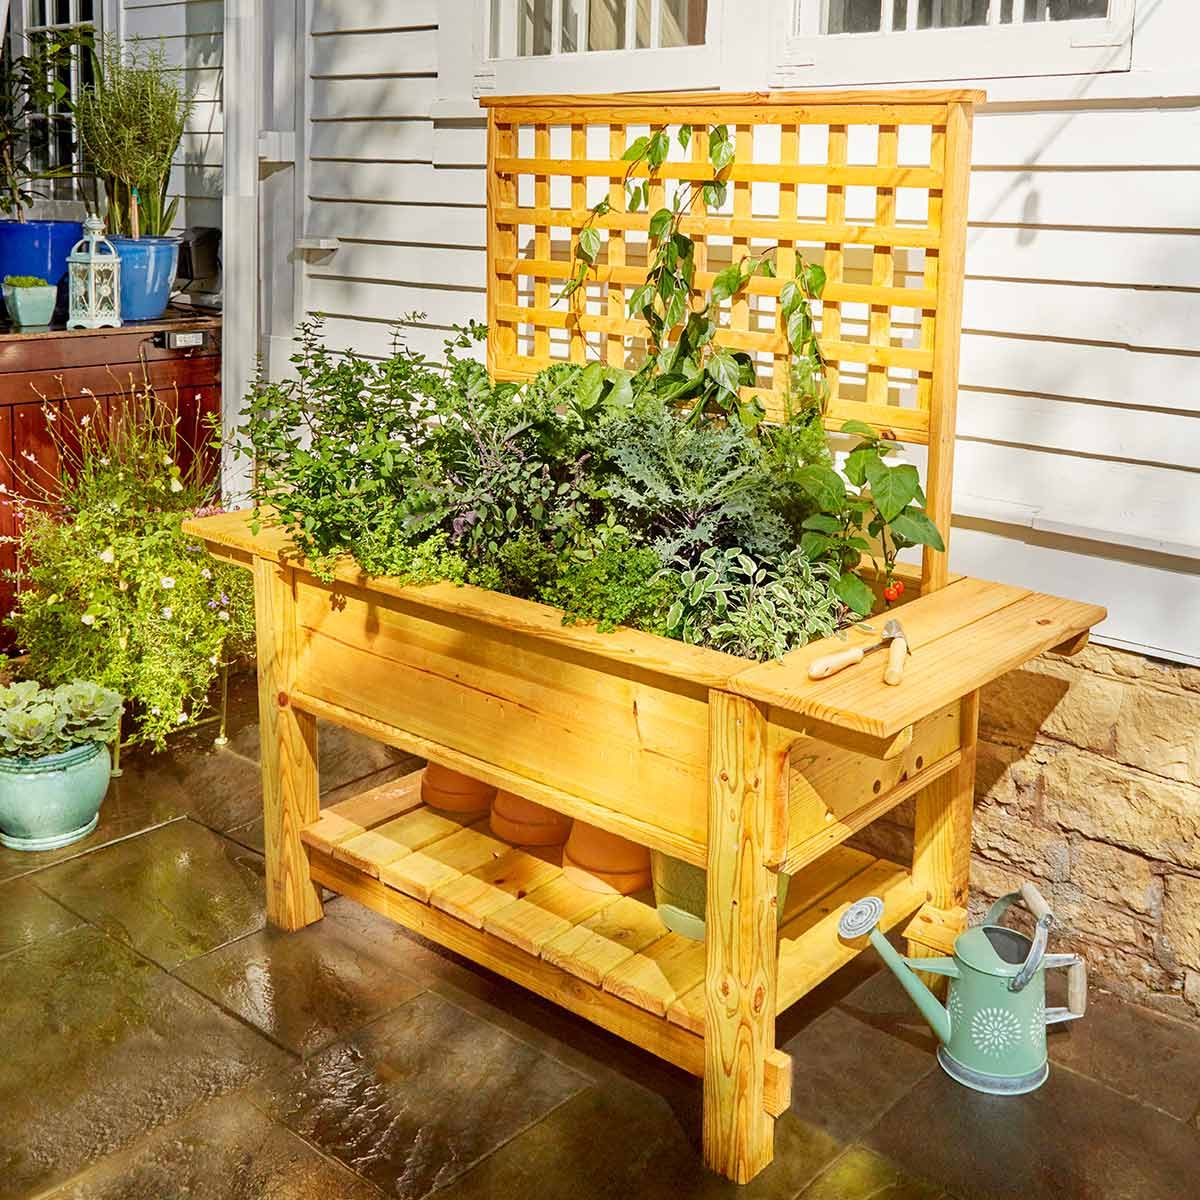 Outdoor woodworking projects